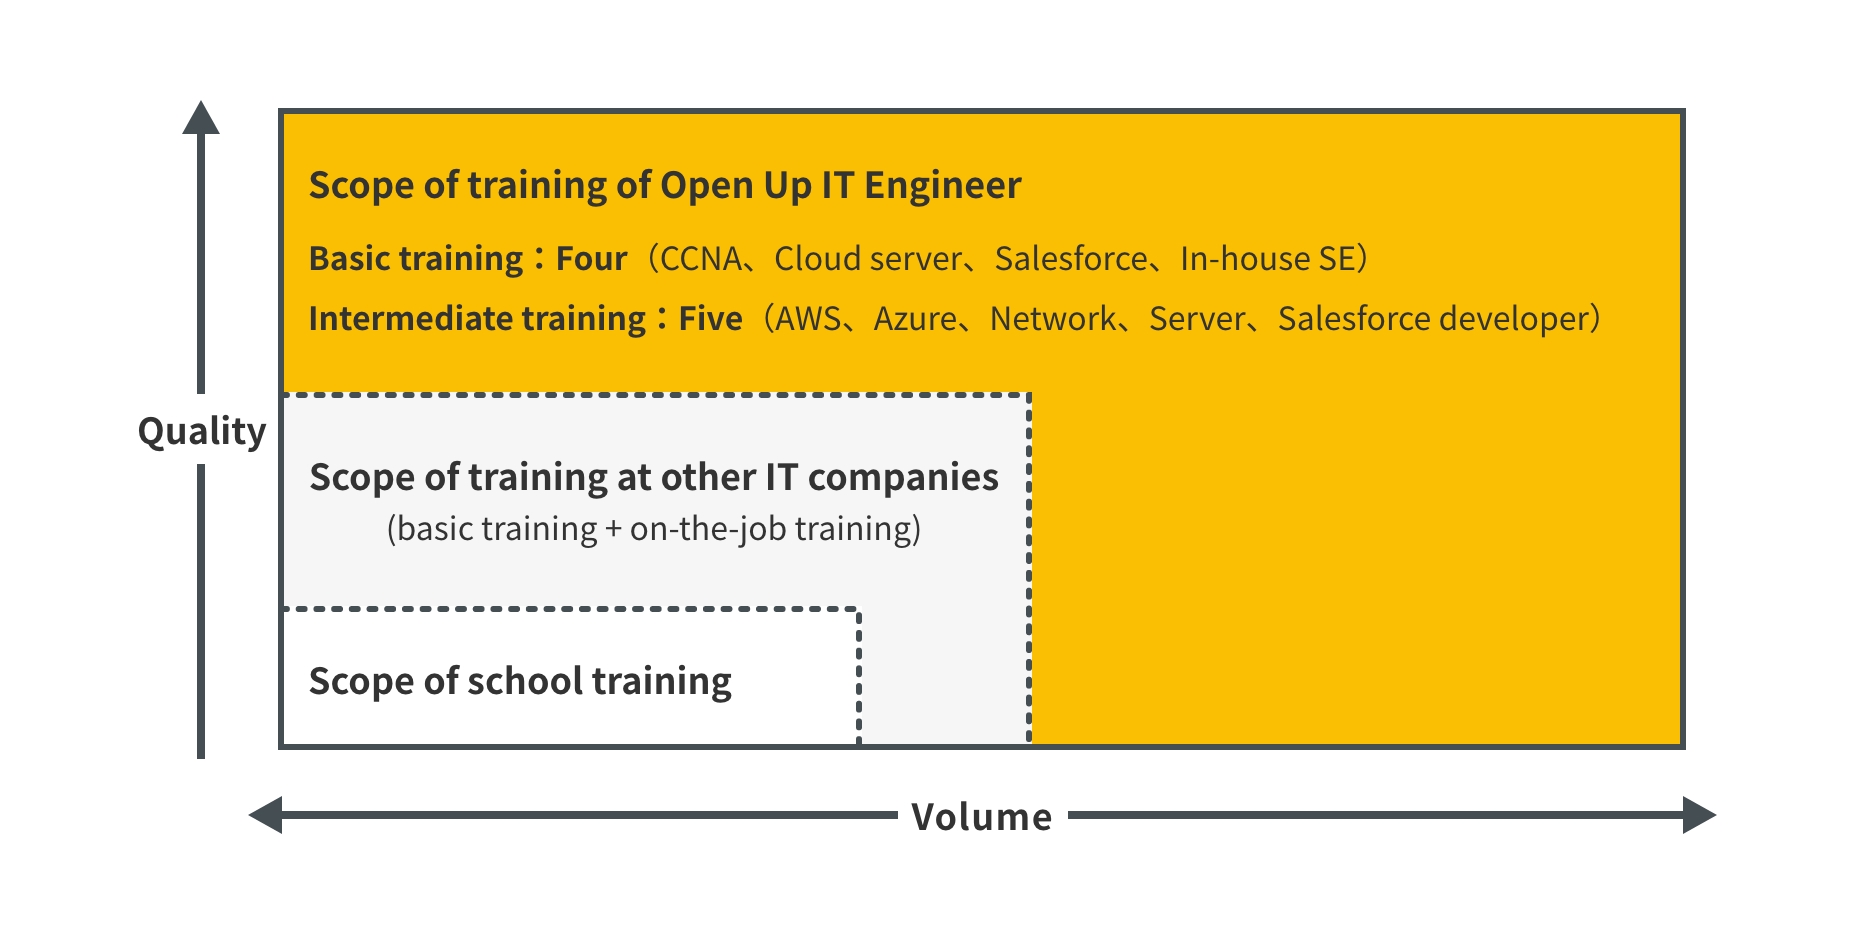 Scope of training of Open Up IT Engineer